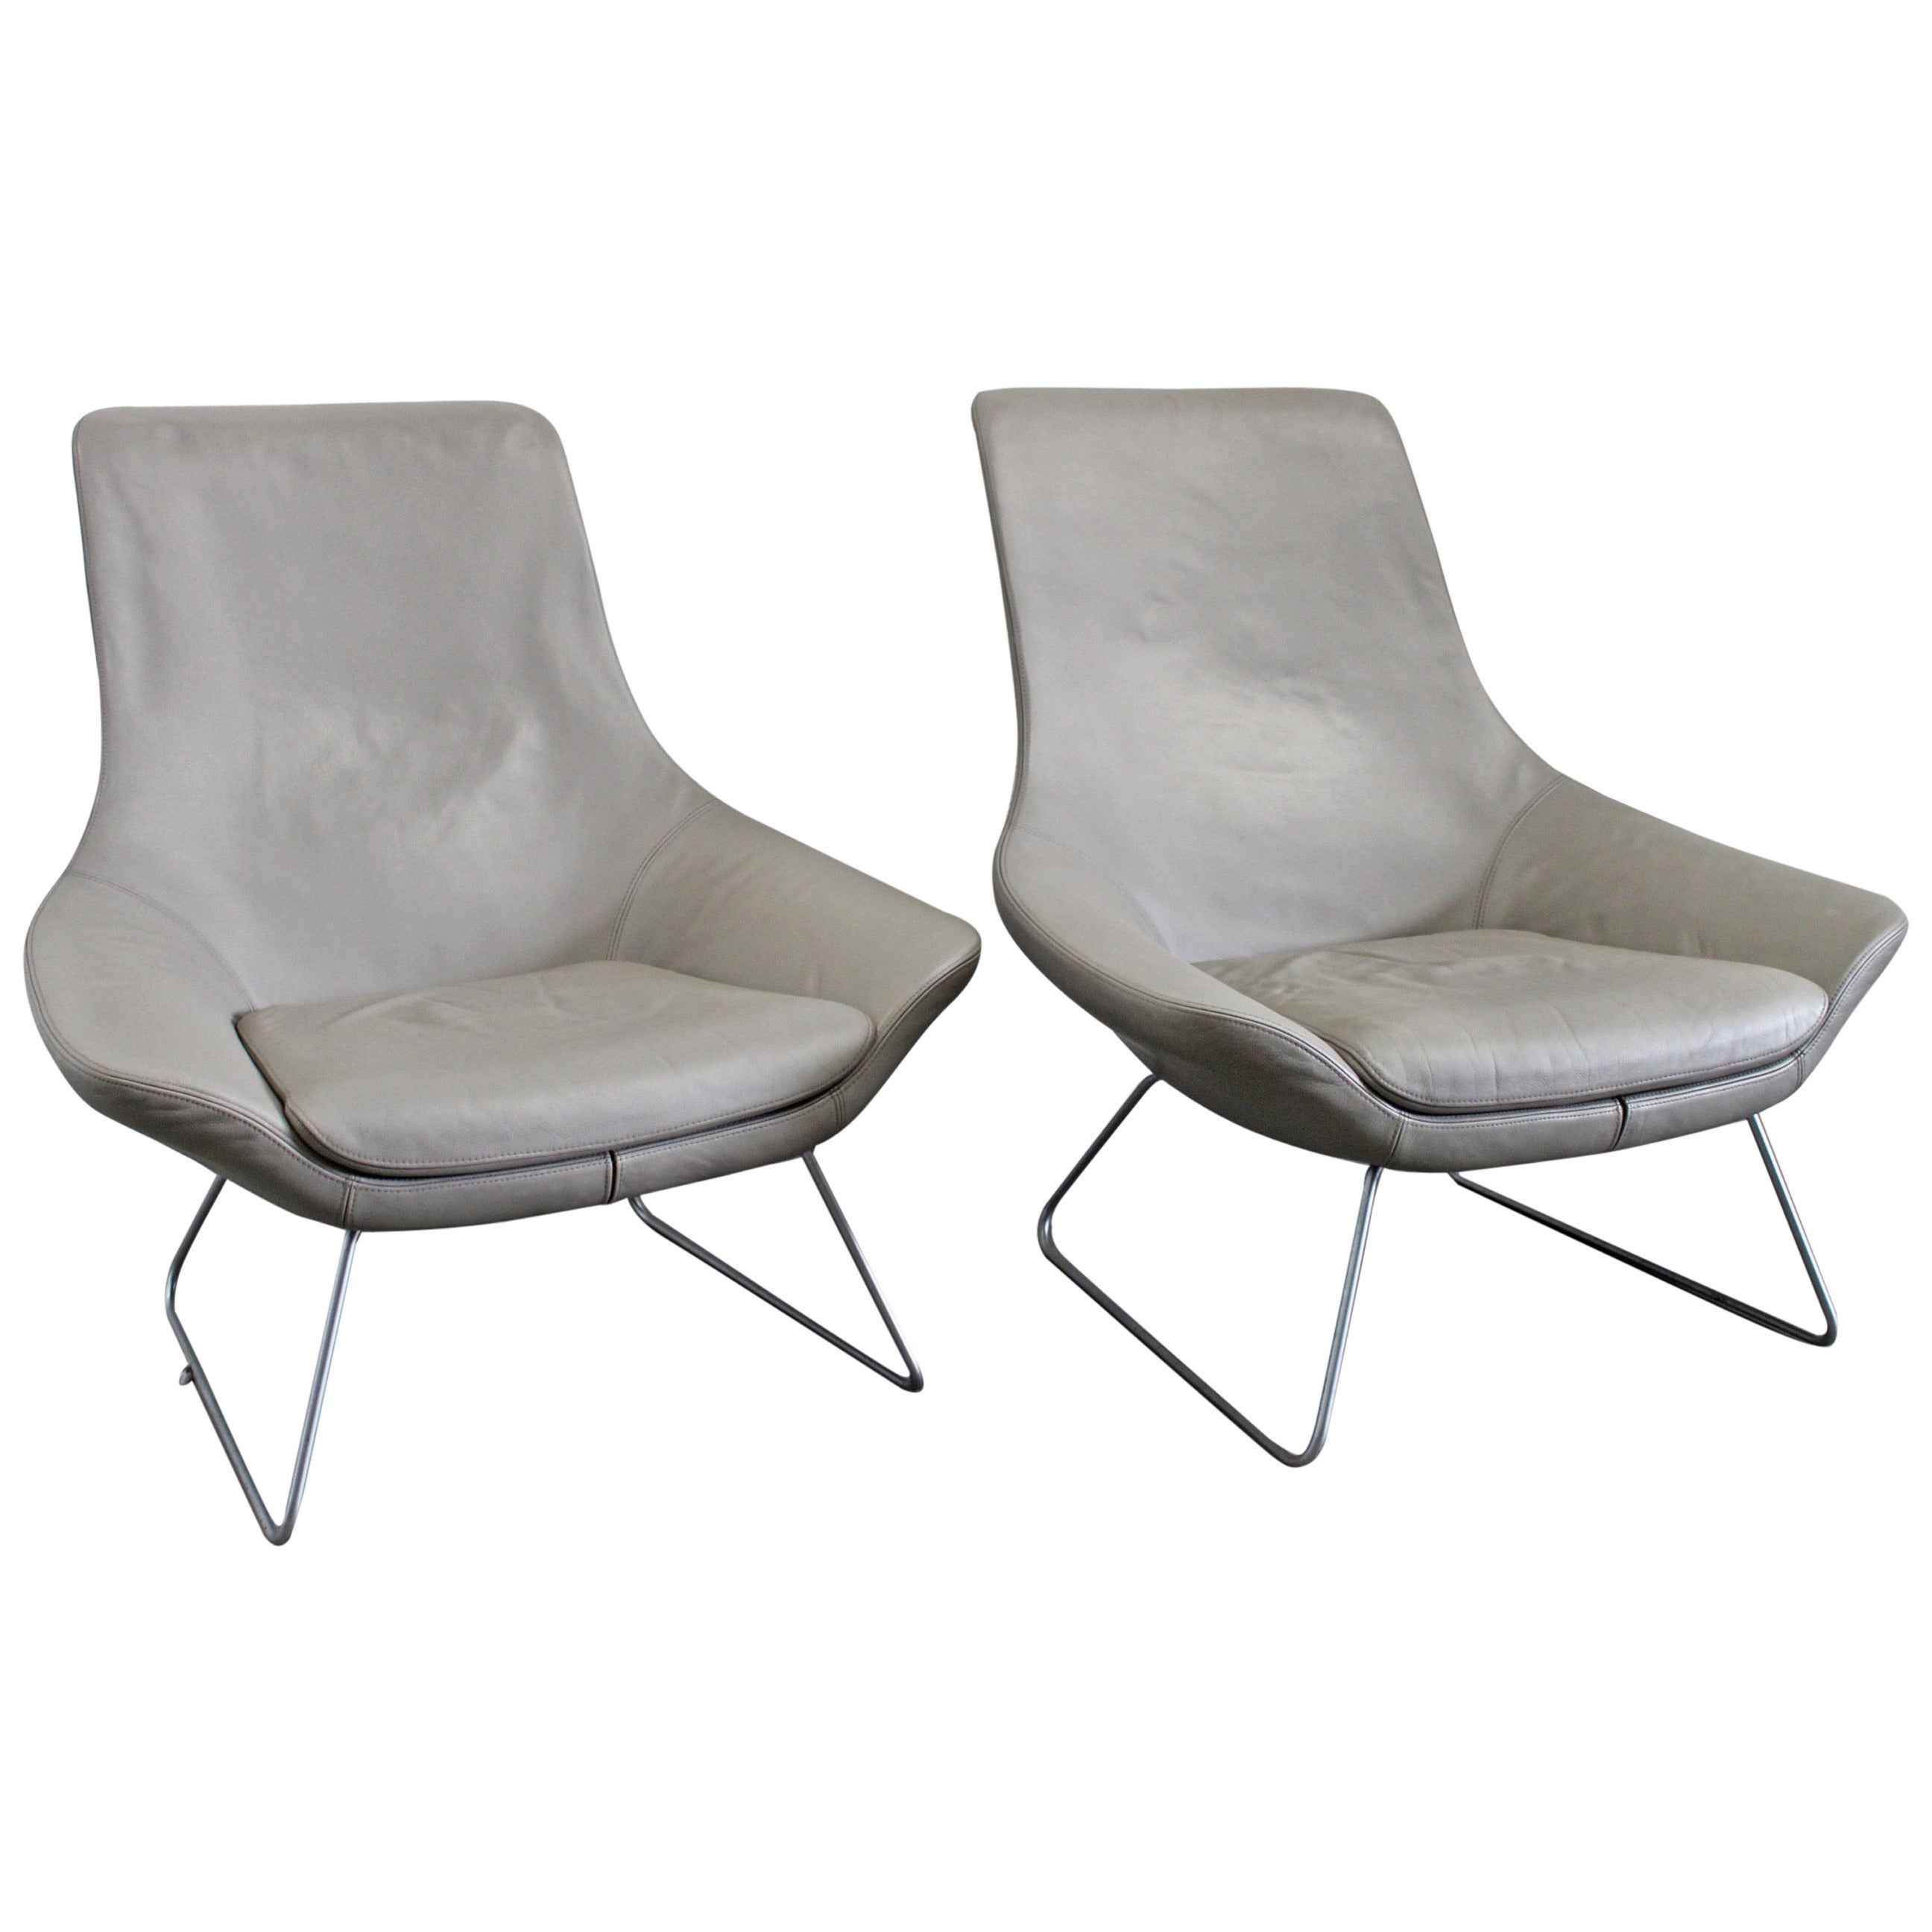 Walter Knoll "Flow 210-10" Armchairs in Grey Leather by PearsonLloyd